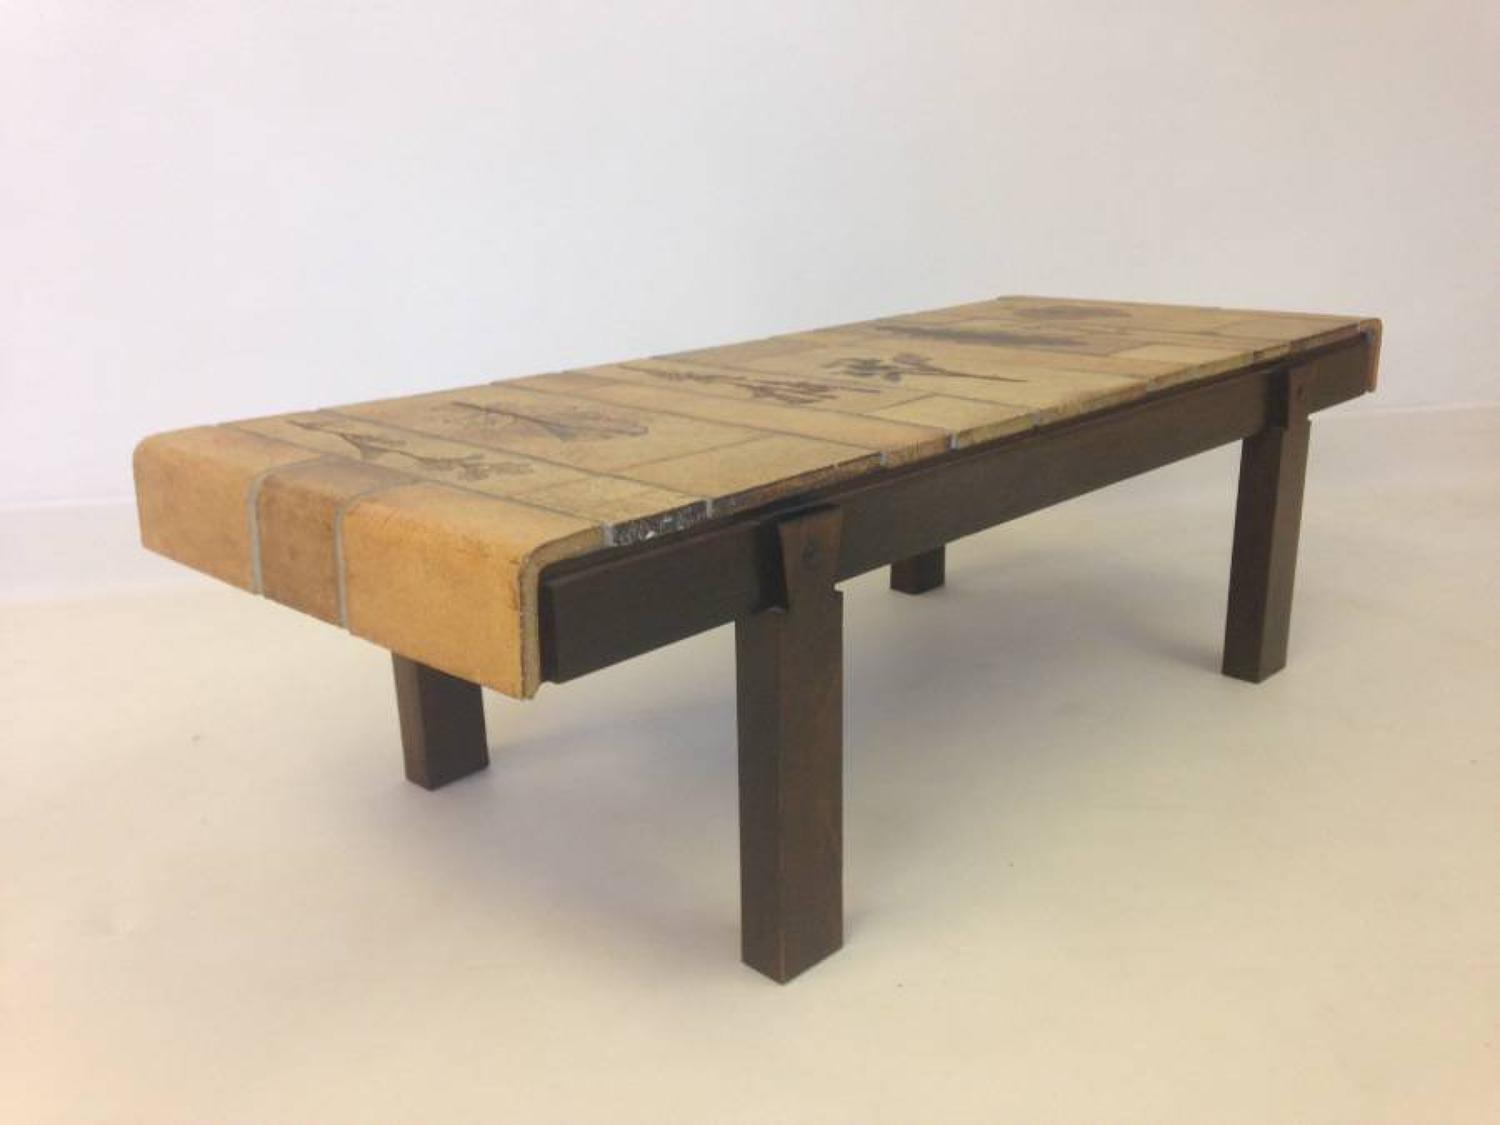 Ceramic coffee table by Roger Capron